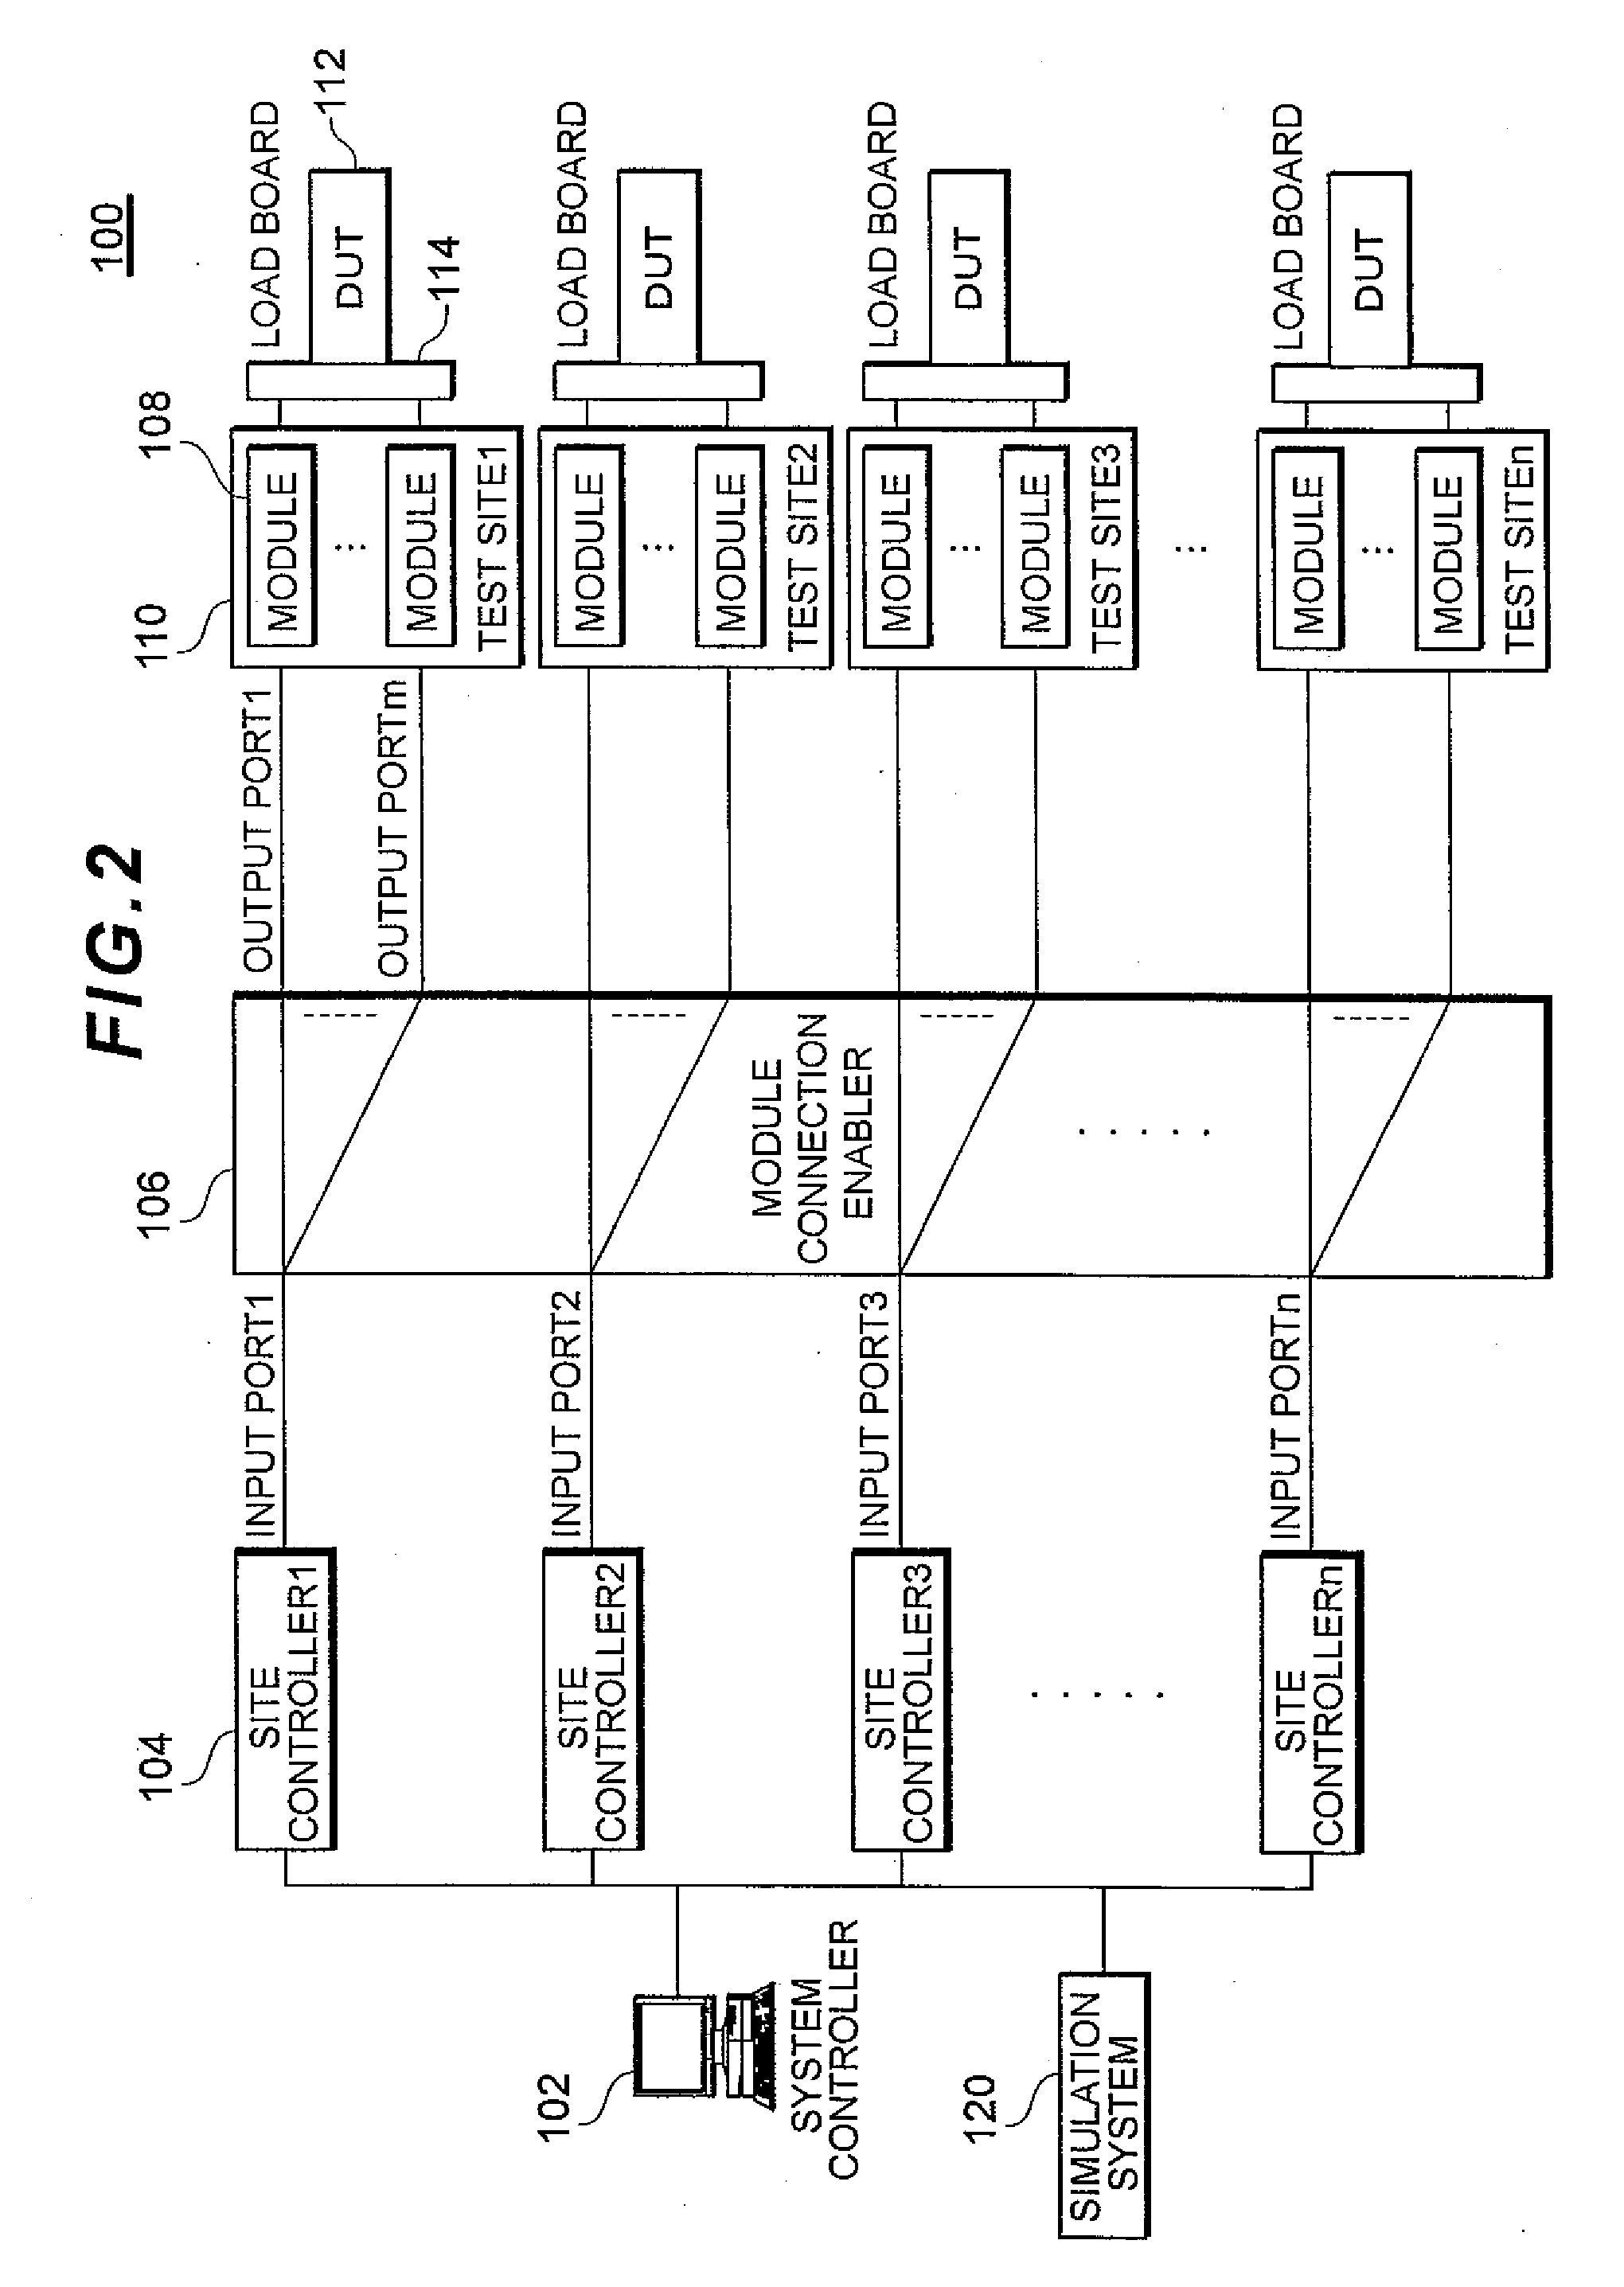 System, method, and program product for simulating test equipment